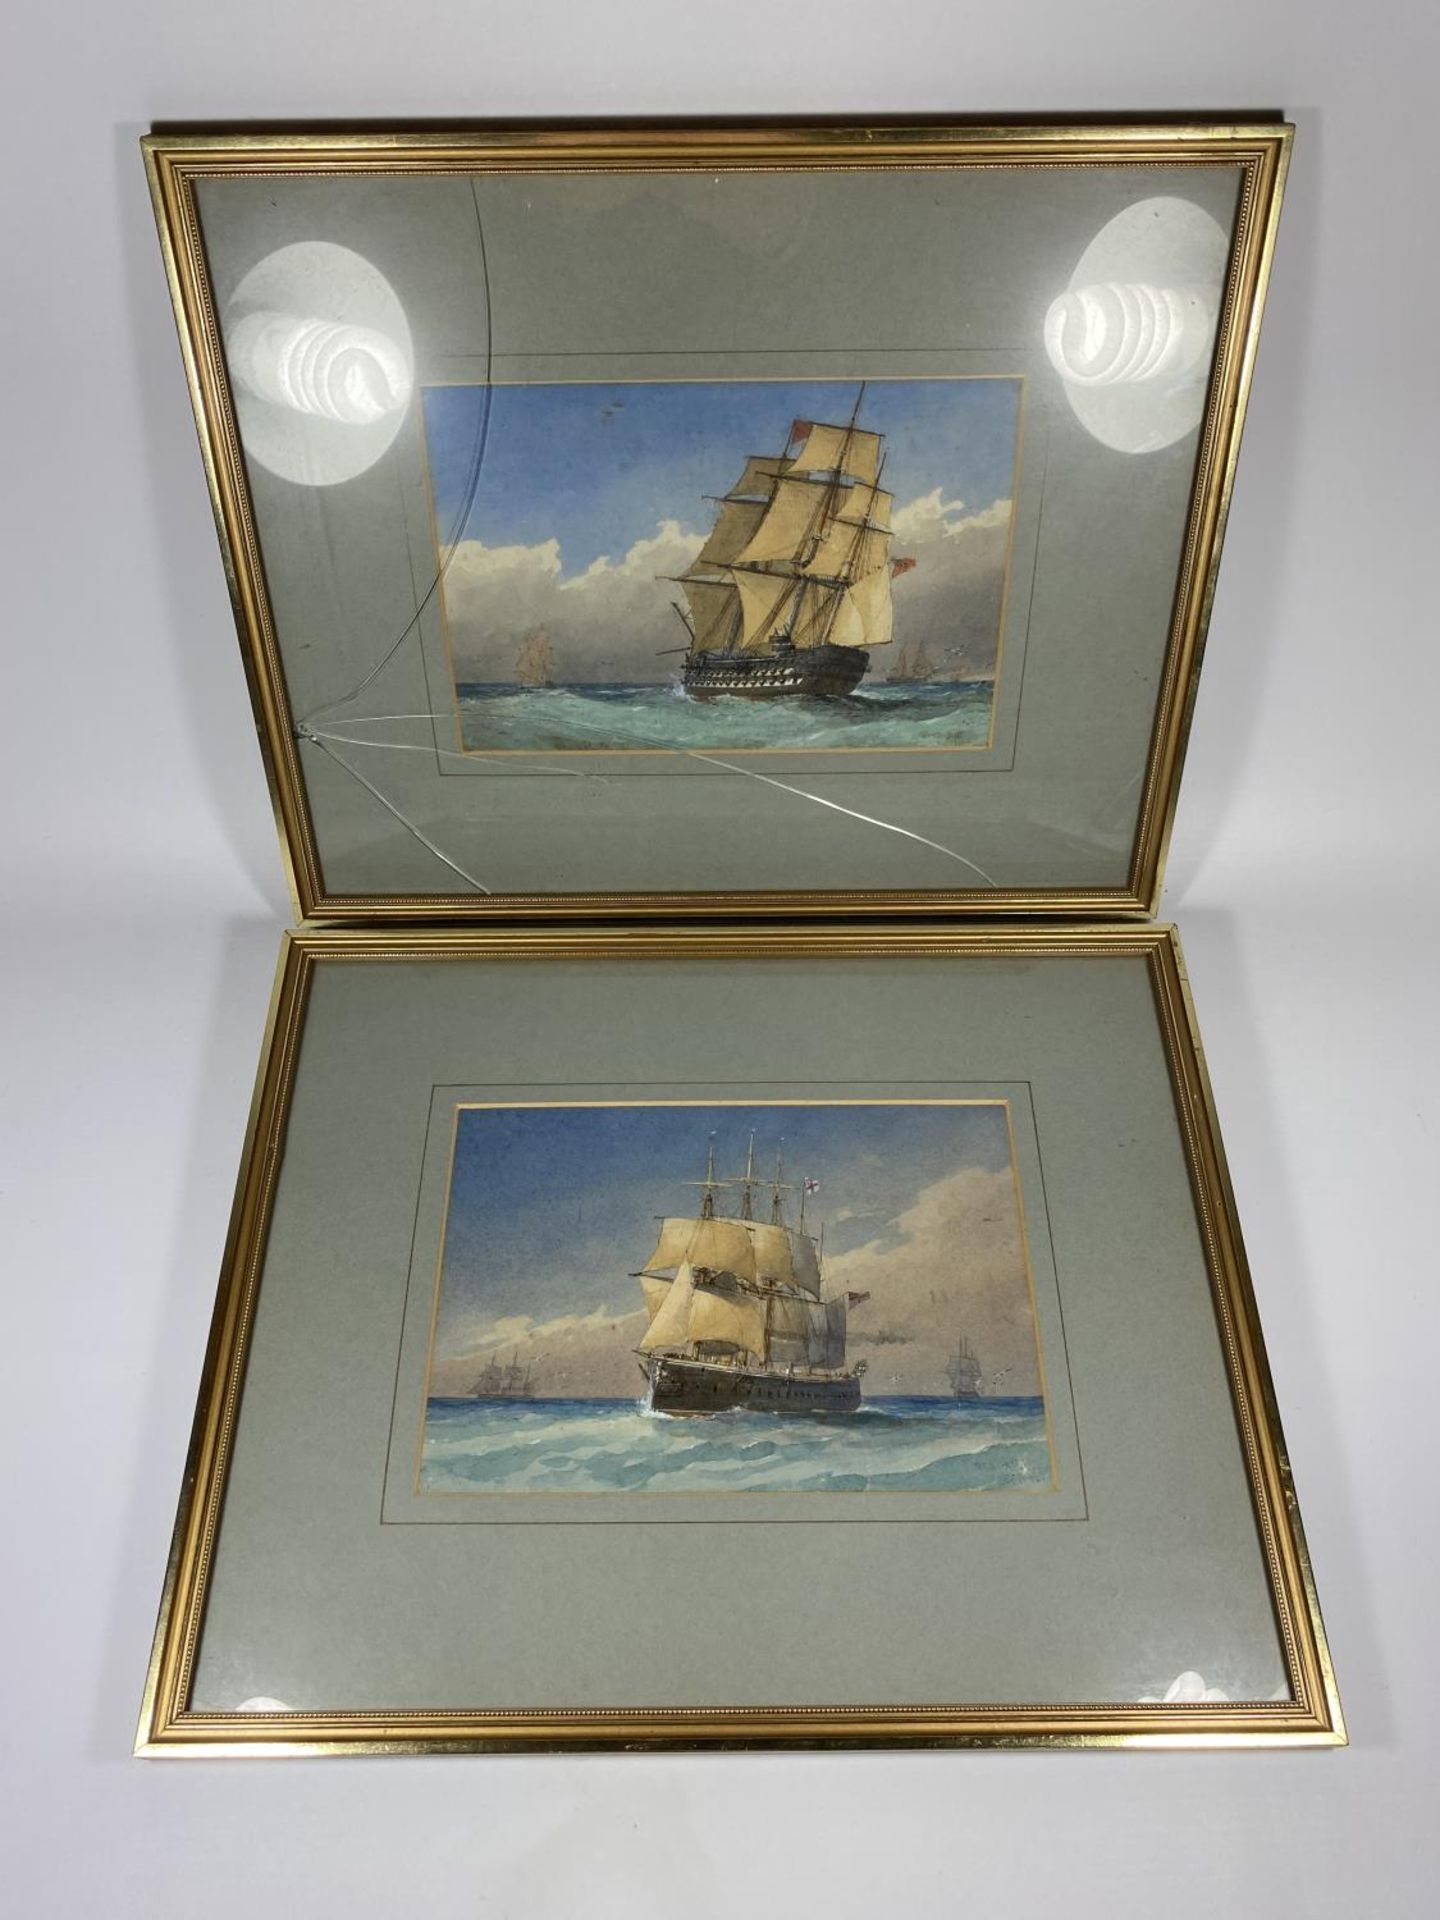 A PAIR OF WILLIAM FREDERICK MITCHELL (1845-1914) MARITIME / NAVAL WATERCOLOURS OF GALLEON SHIPS,